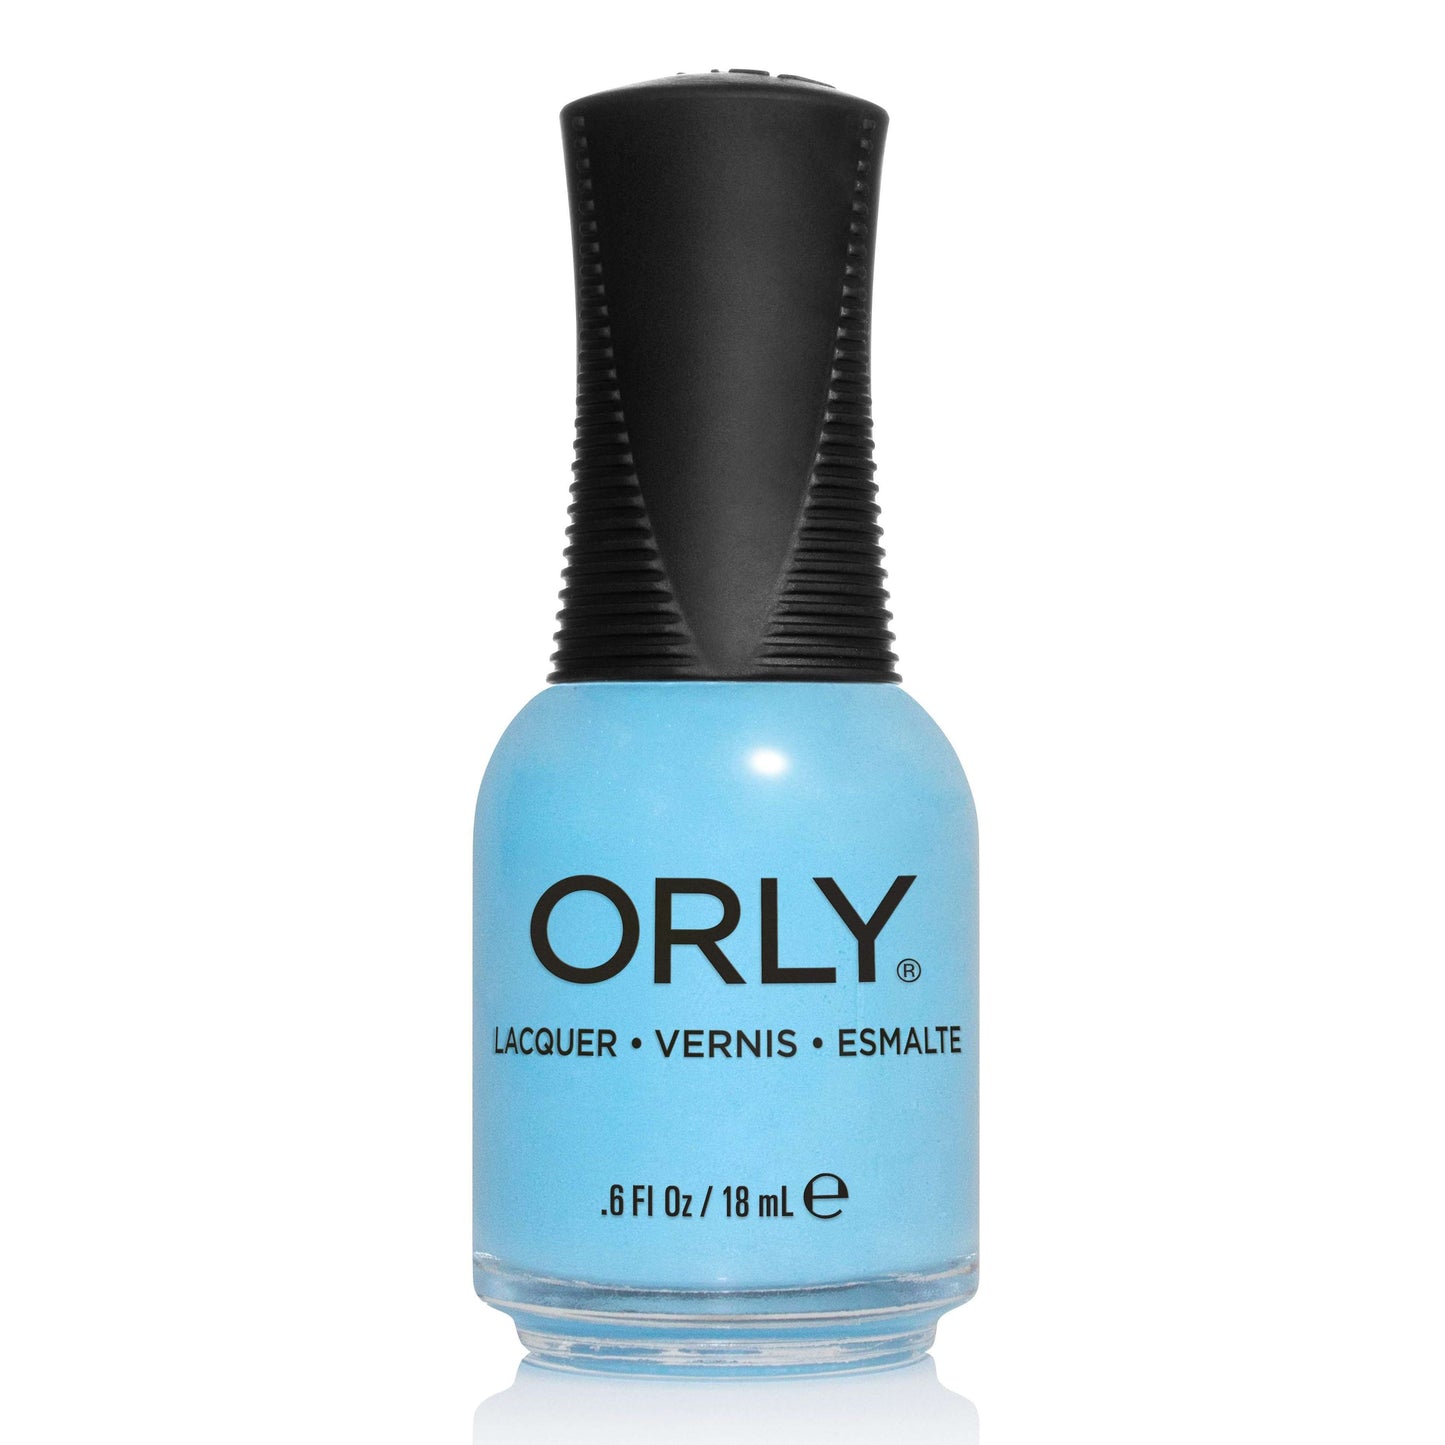 Orly Nail Lacquer Glass Half Full 2000017 .6 fl oz Light Aqua Shimmer-Orly-Brand_Orly,Collection_Nails,Nail_Polish,ORLY_Summer Laquers